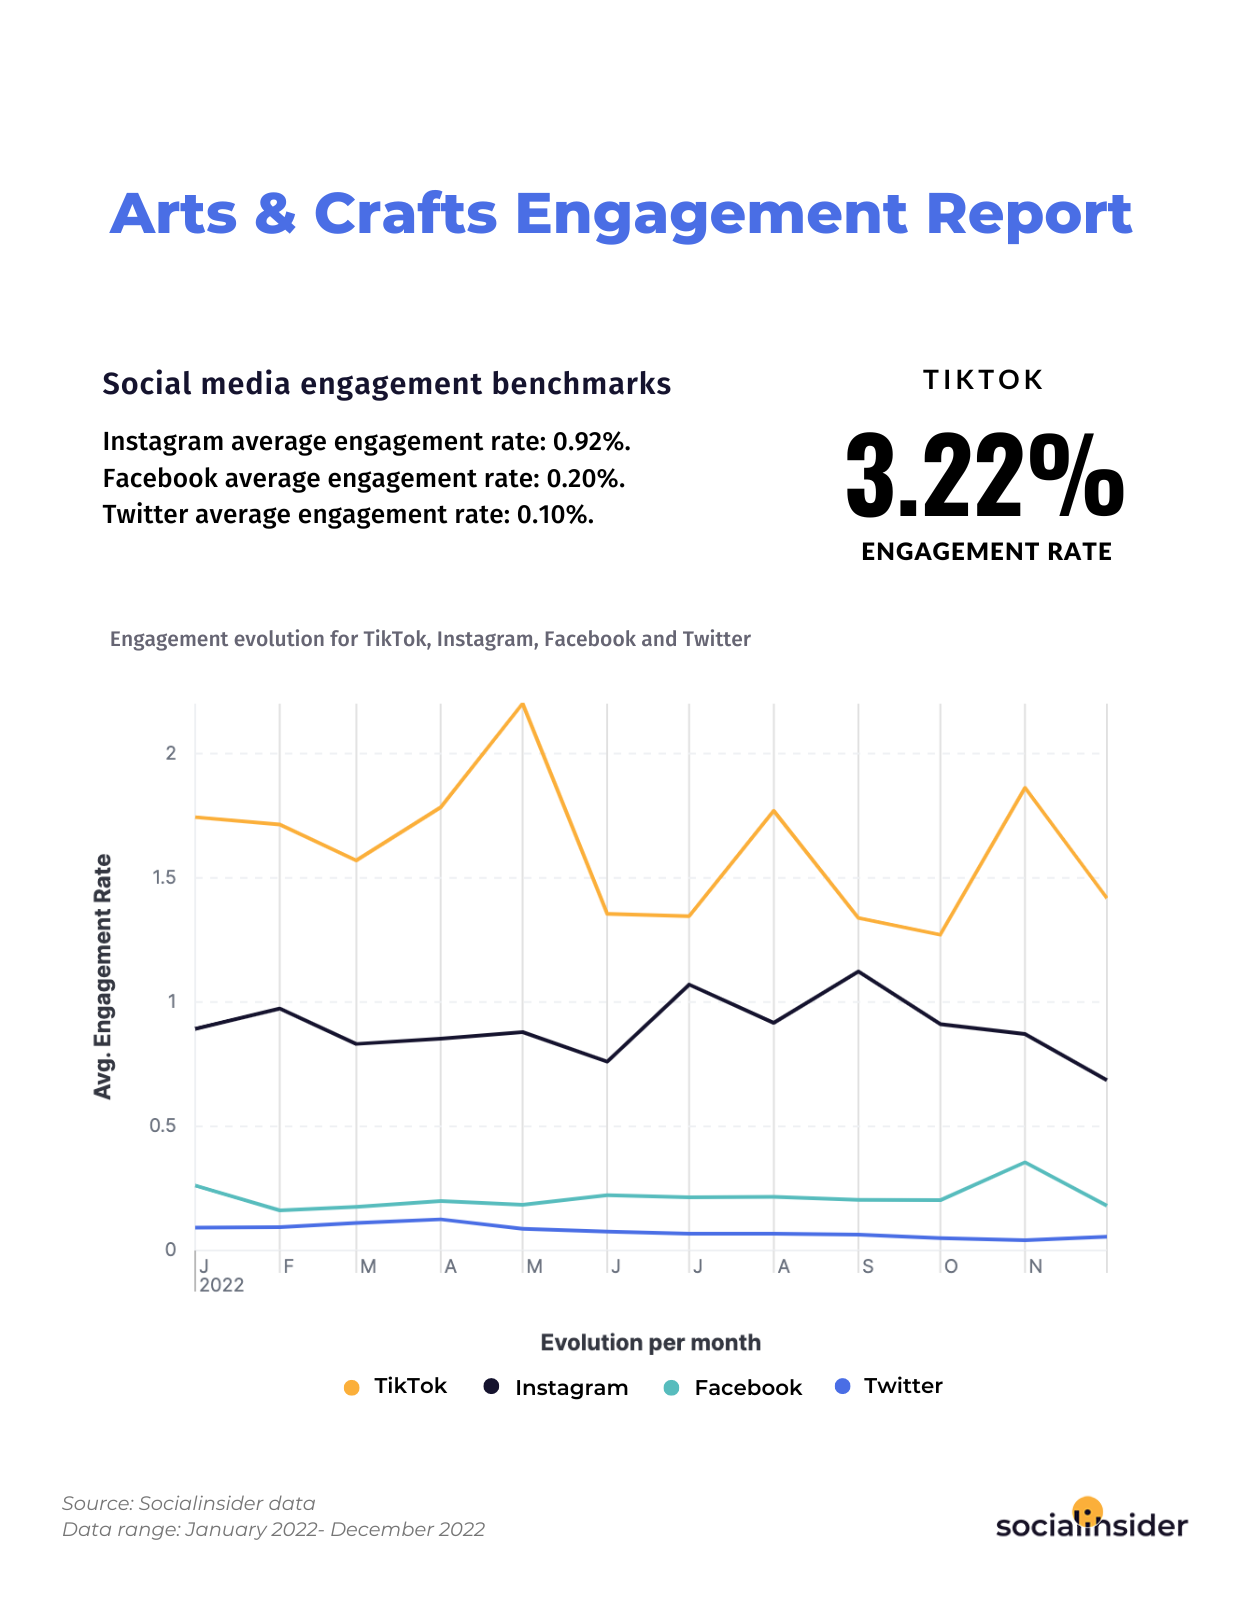 This chart shows social media engagement benchmarks for brands within the arts & crafts industry.